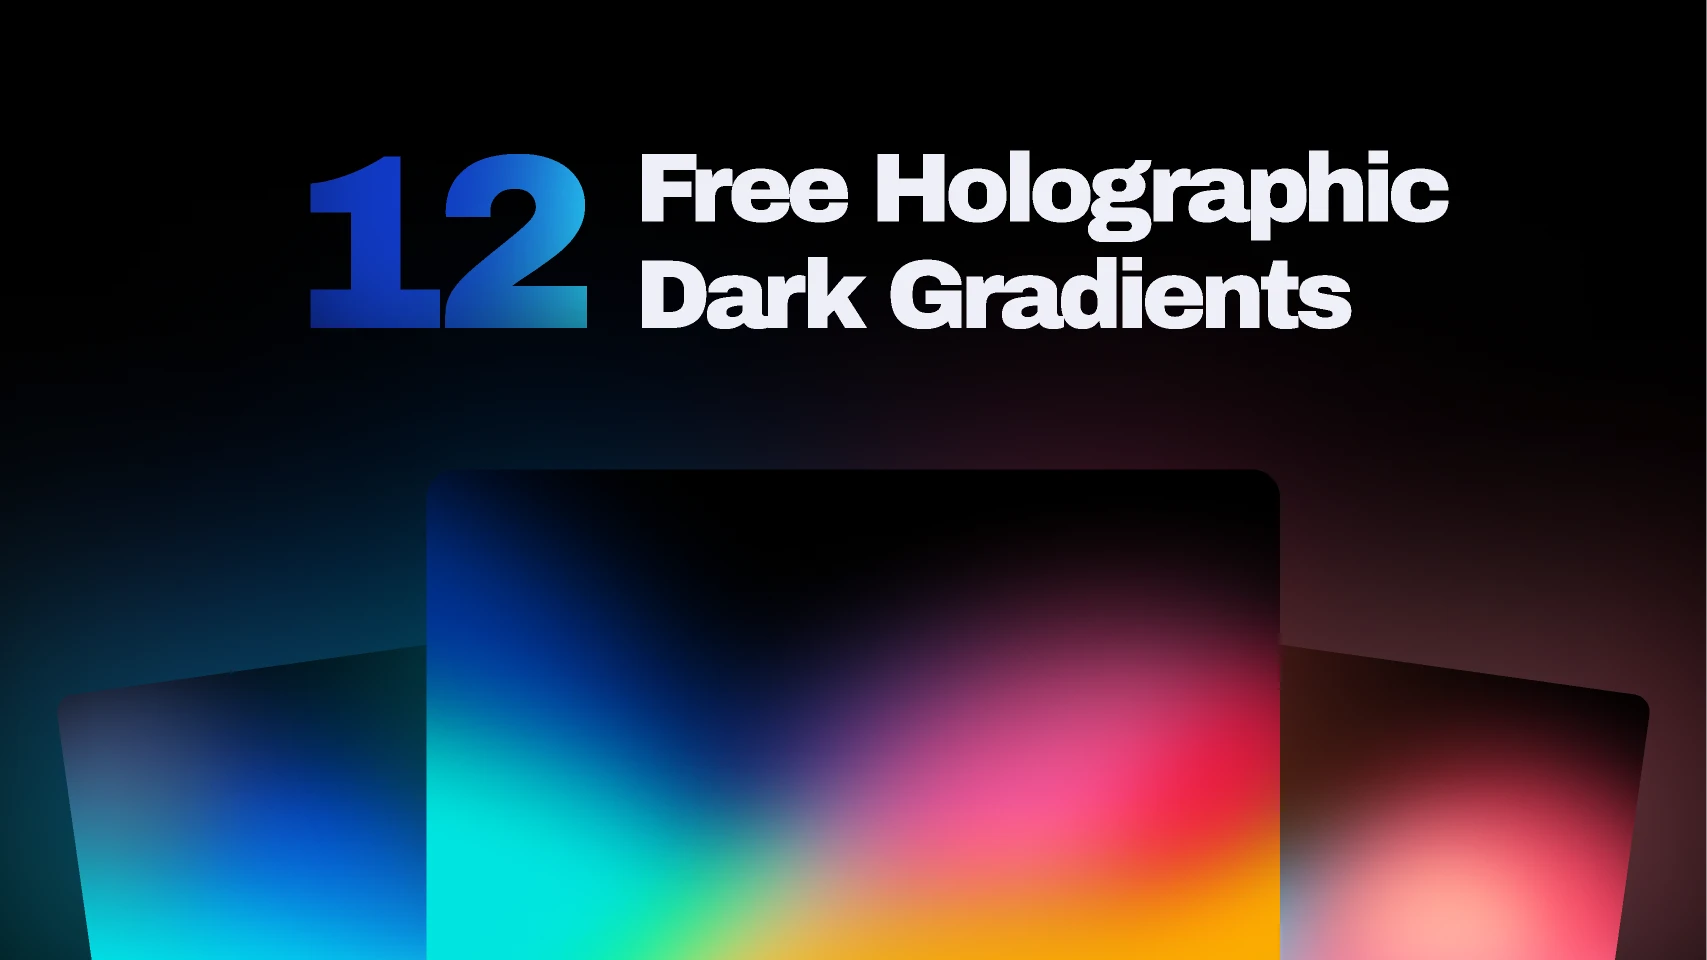 12 Free Holographic Dark Gradients 1.0 for Figma and Adobe XD